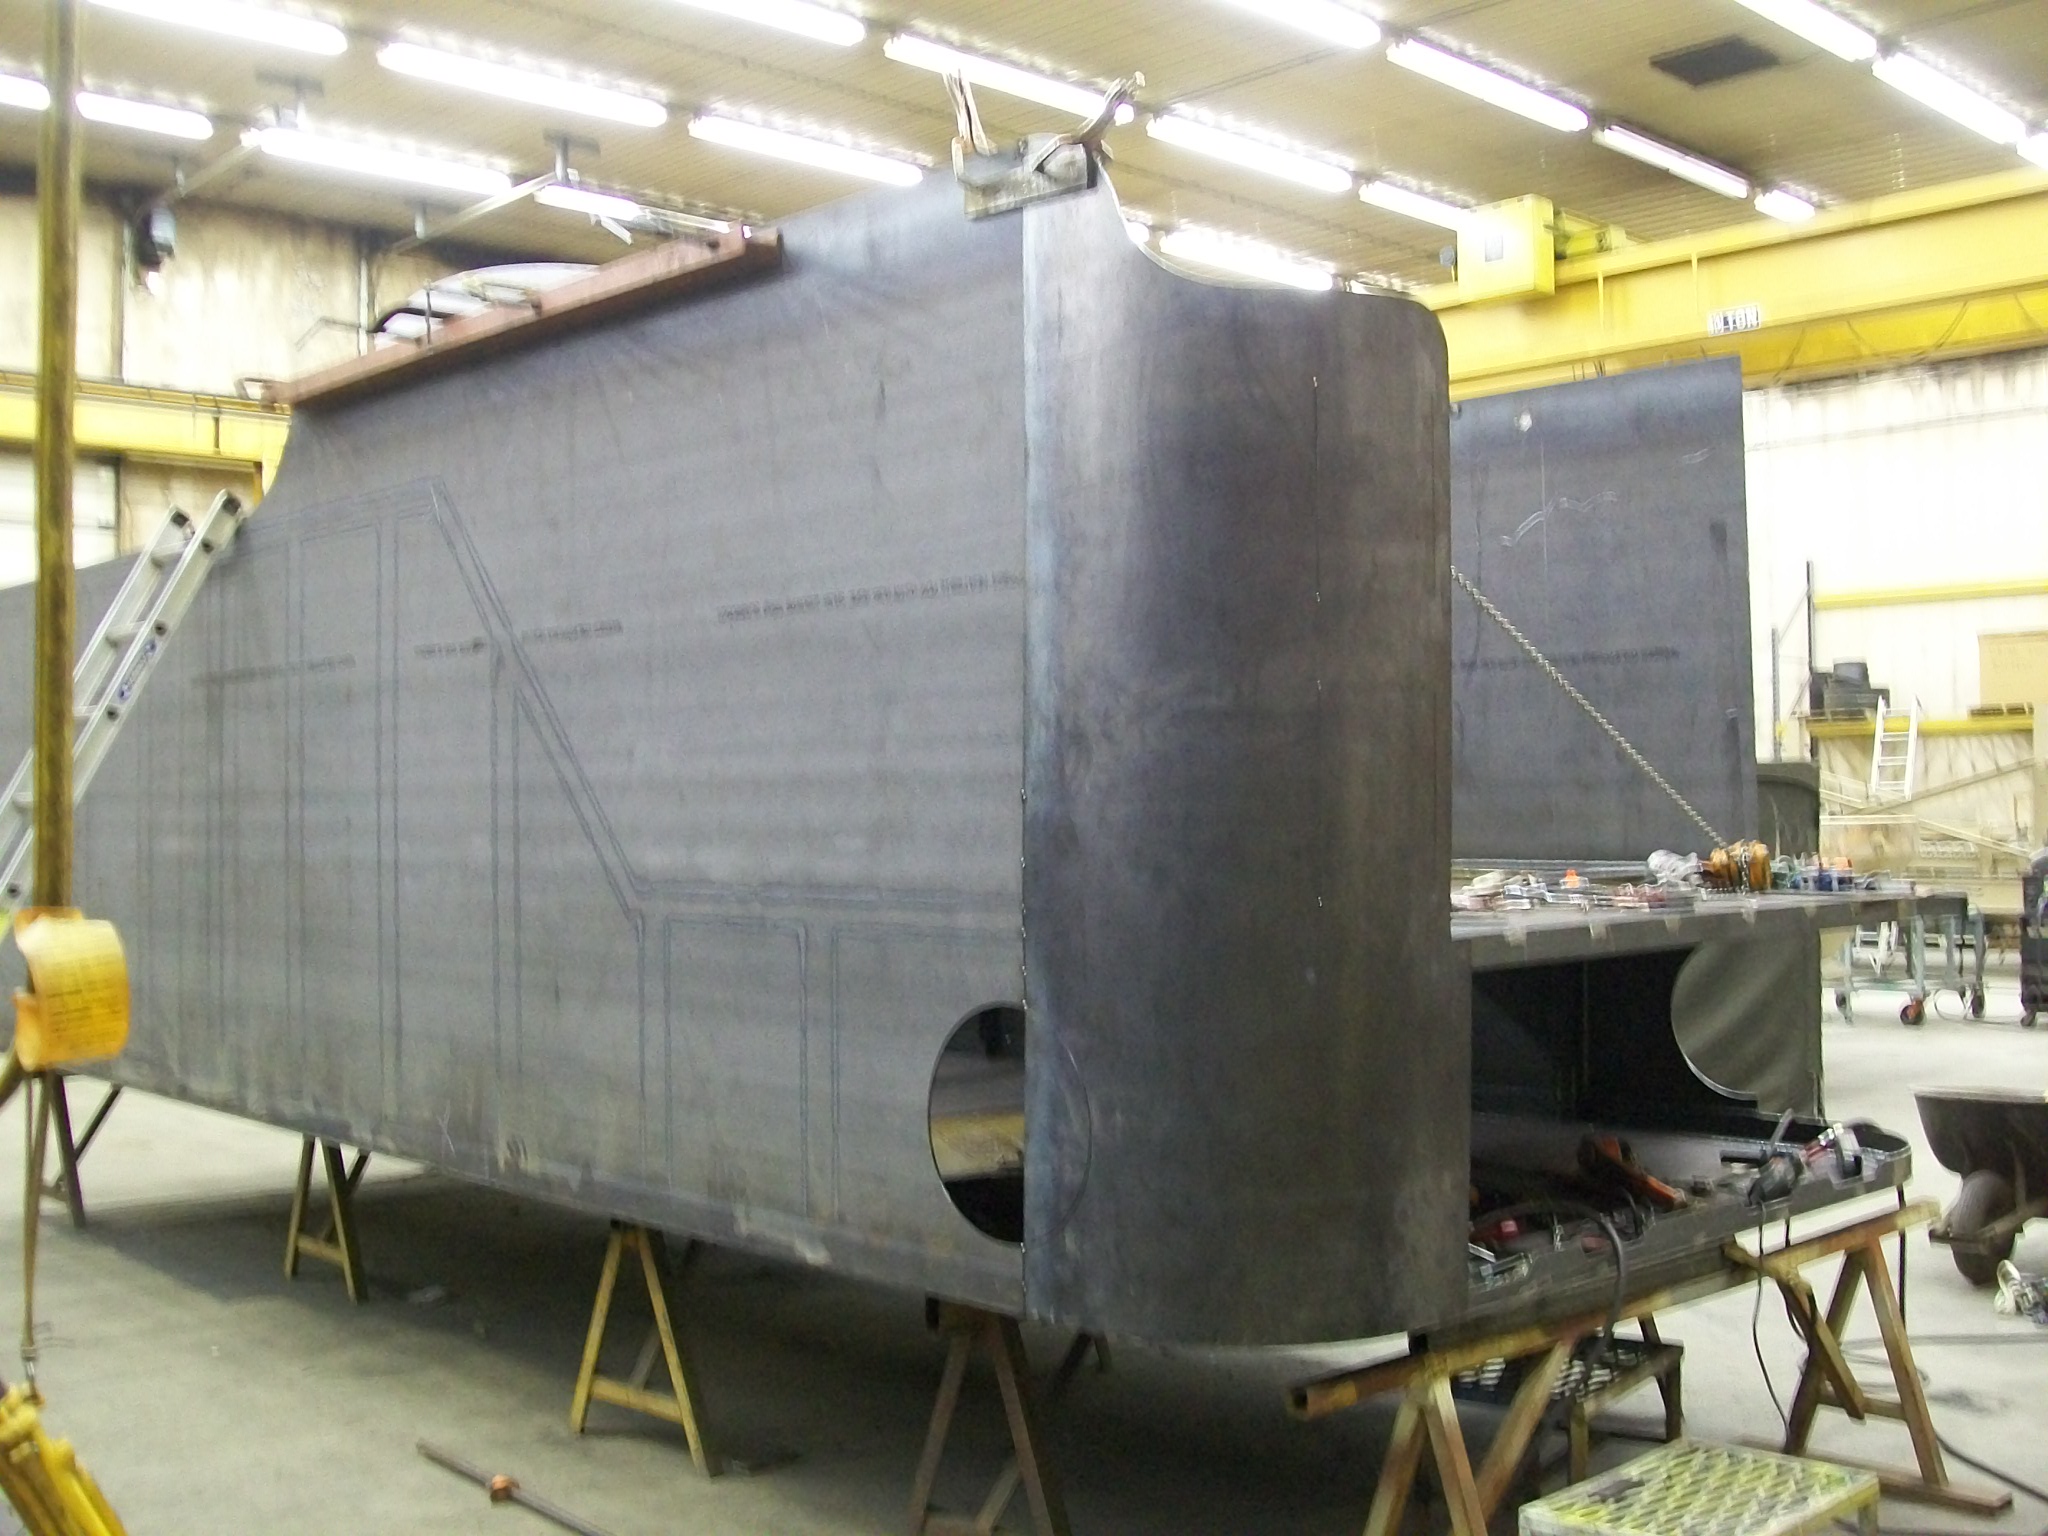 New C&NW 1385 tender tank under construction at DRM Industries. February 28, 2012. Photo by DRM Industries